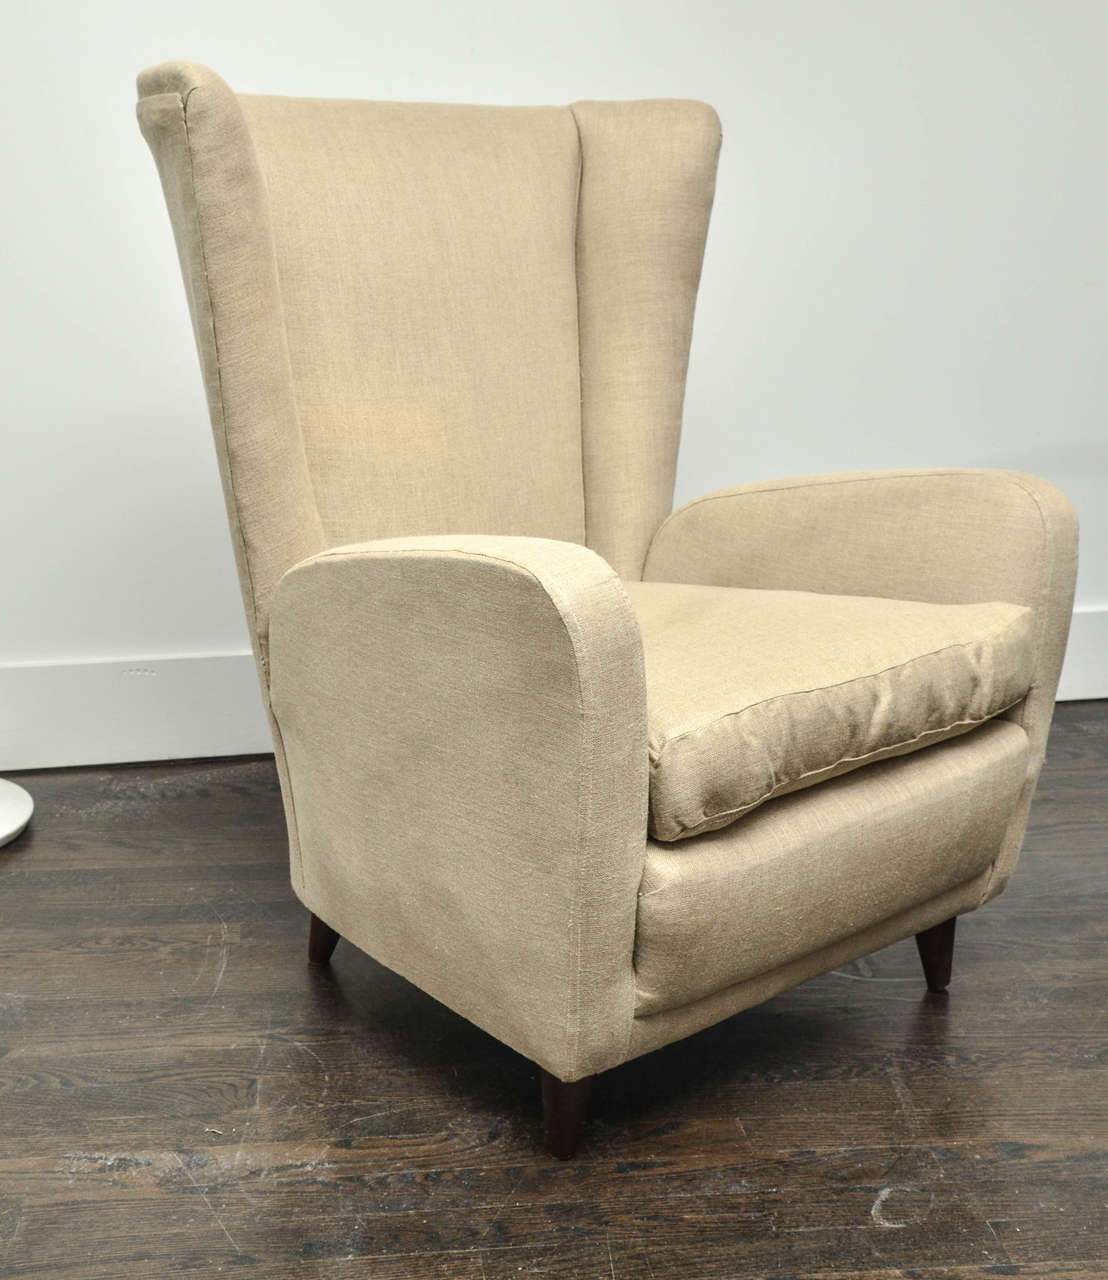 Set of two armchairs by Paolo Buffa.
Provenance: Hotel Bristol Merano.
Newly Upholstered in Linen
